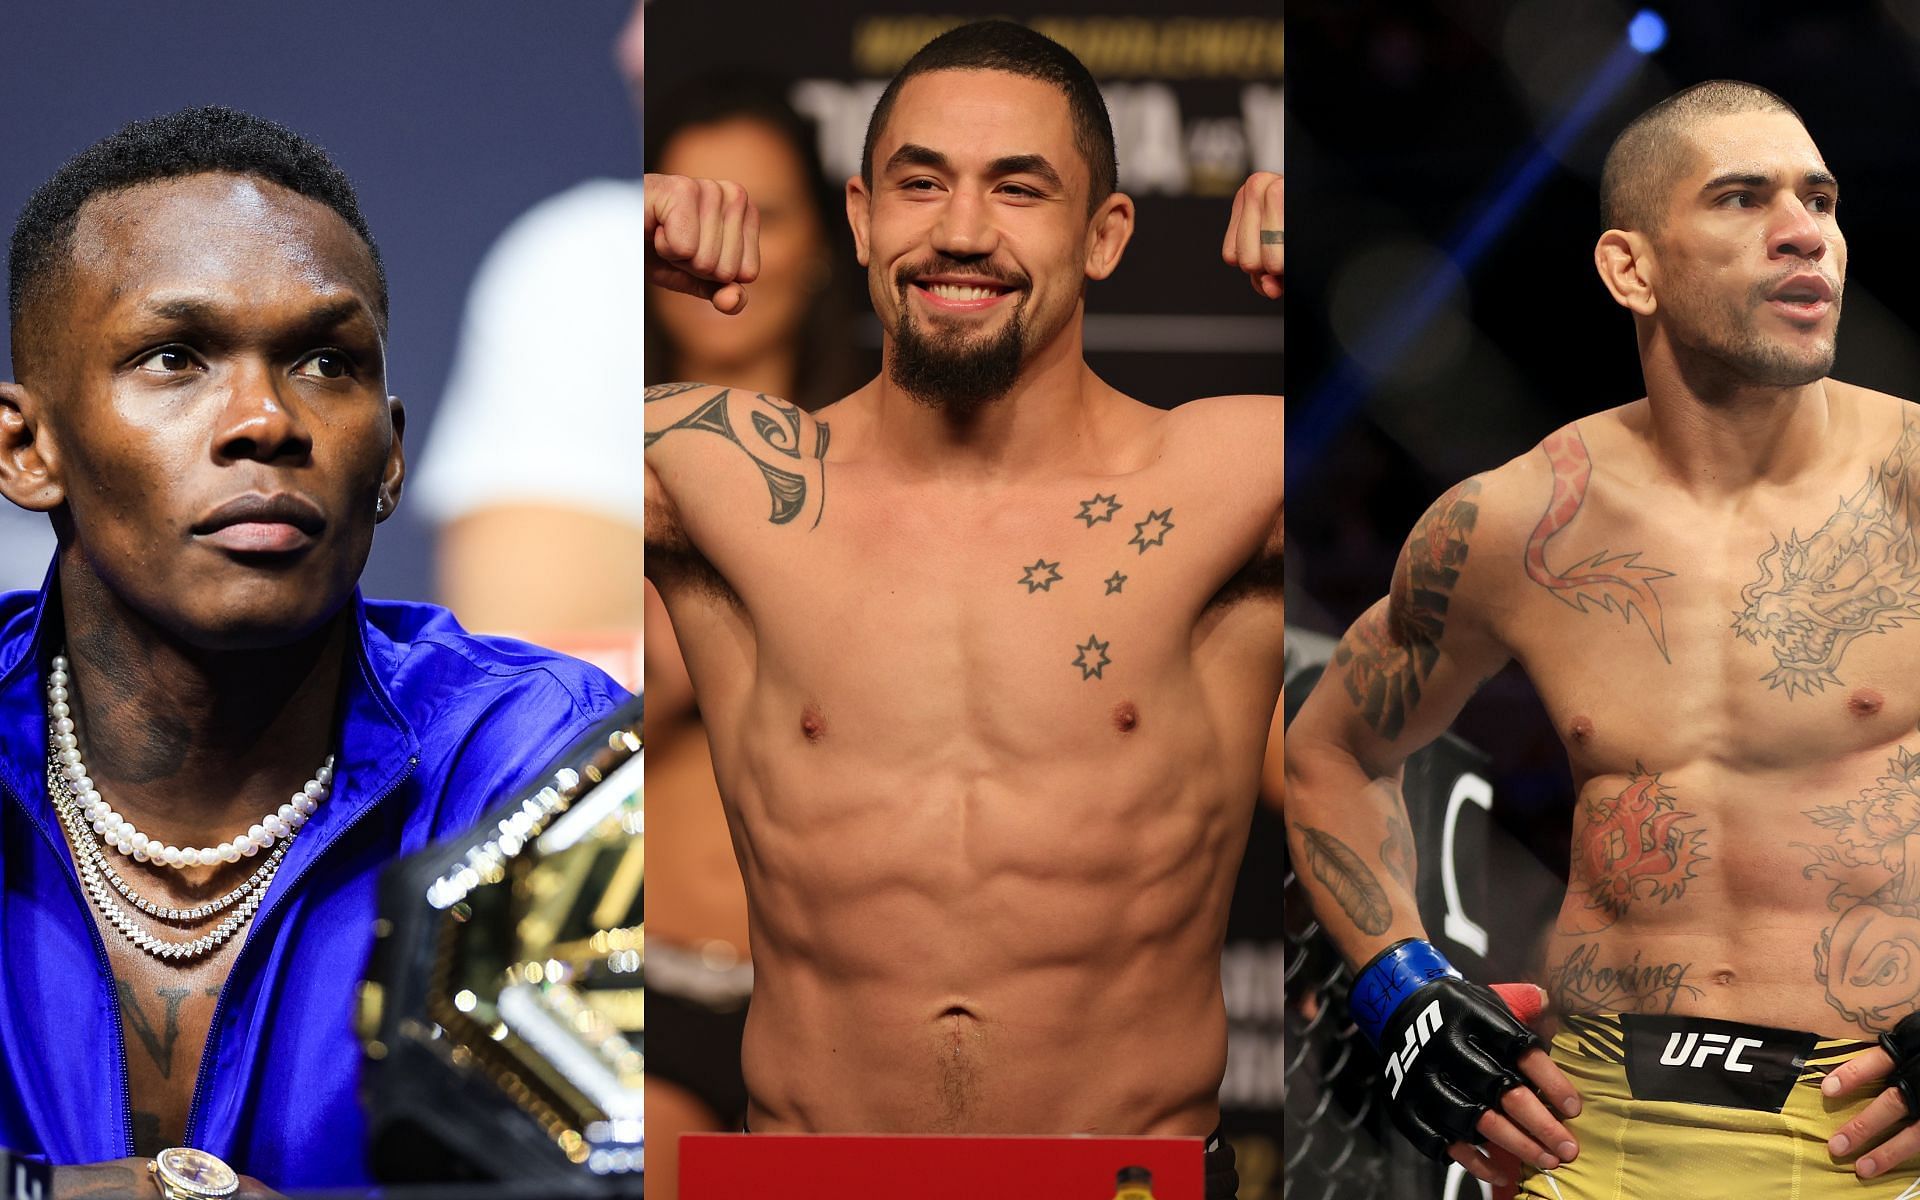 Israel Adesanya (left),Robert Whittaker (middle) and Alex Pereira (right) [Image Courtesy: Getty Images]